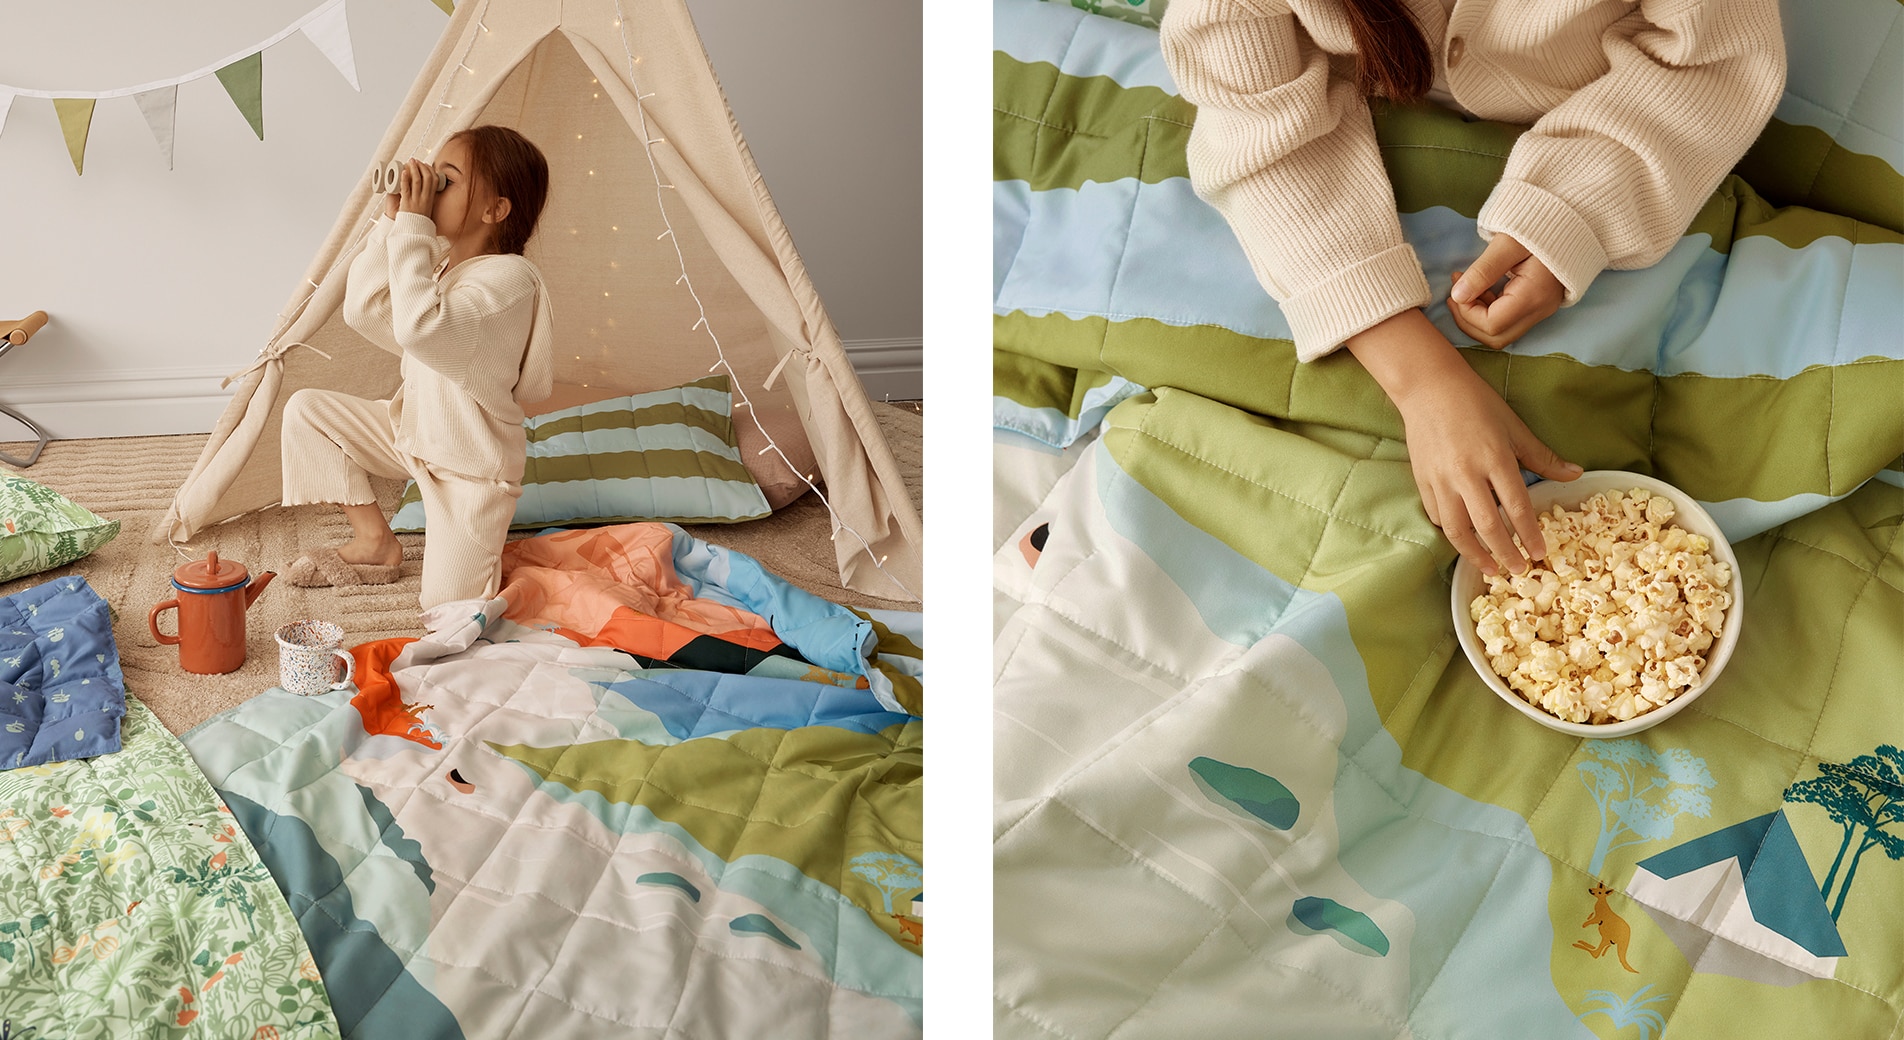 split image. left side: little brunette girl holds binoculars to her eyes, surveing the room. there is a teepee, bunting, fairy lights, and blankets and pillows on the floor. Right side: on a blanket, there's a bowl of popcorn with a hand reaching for it.